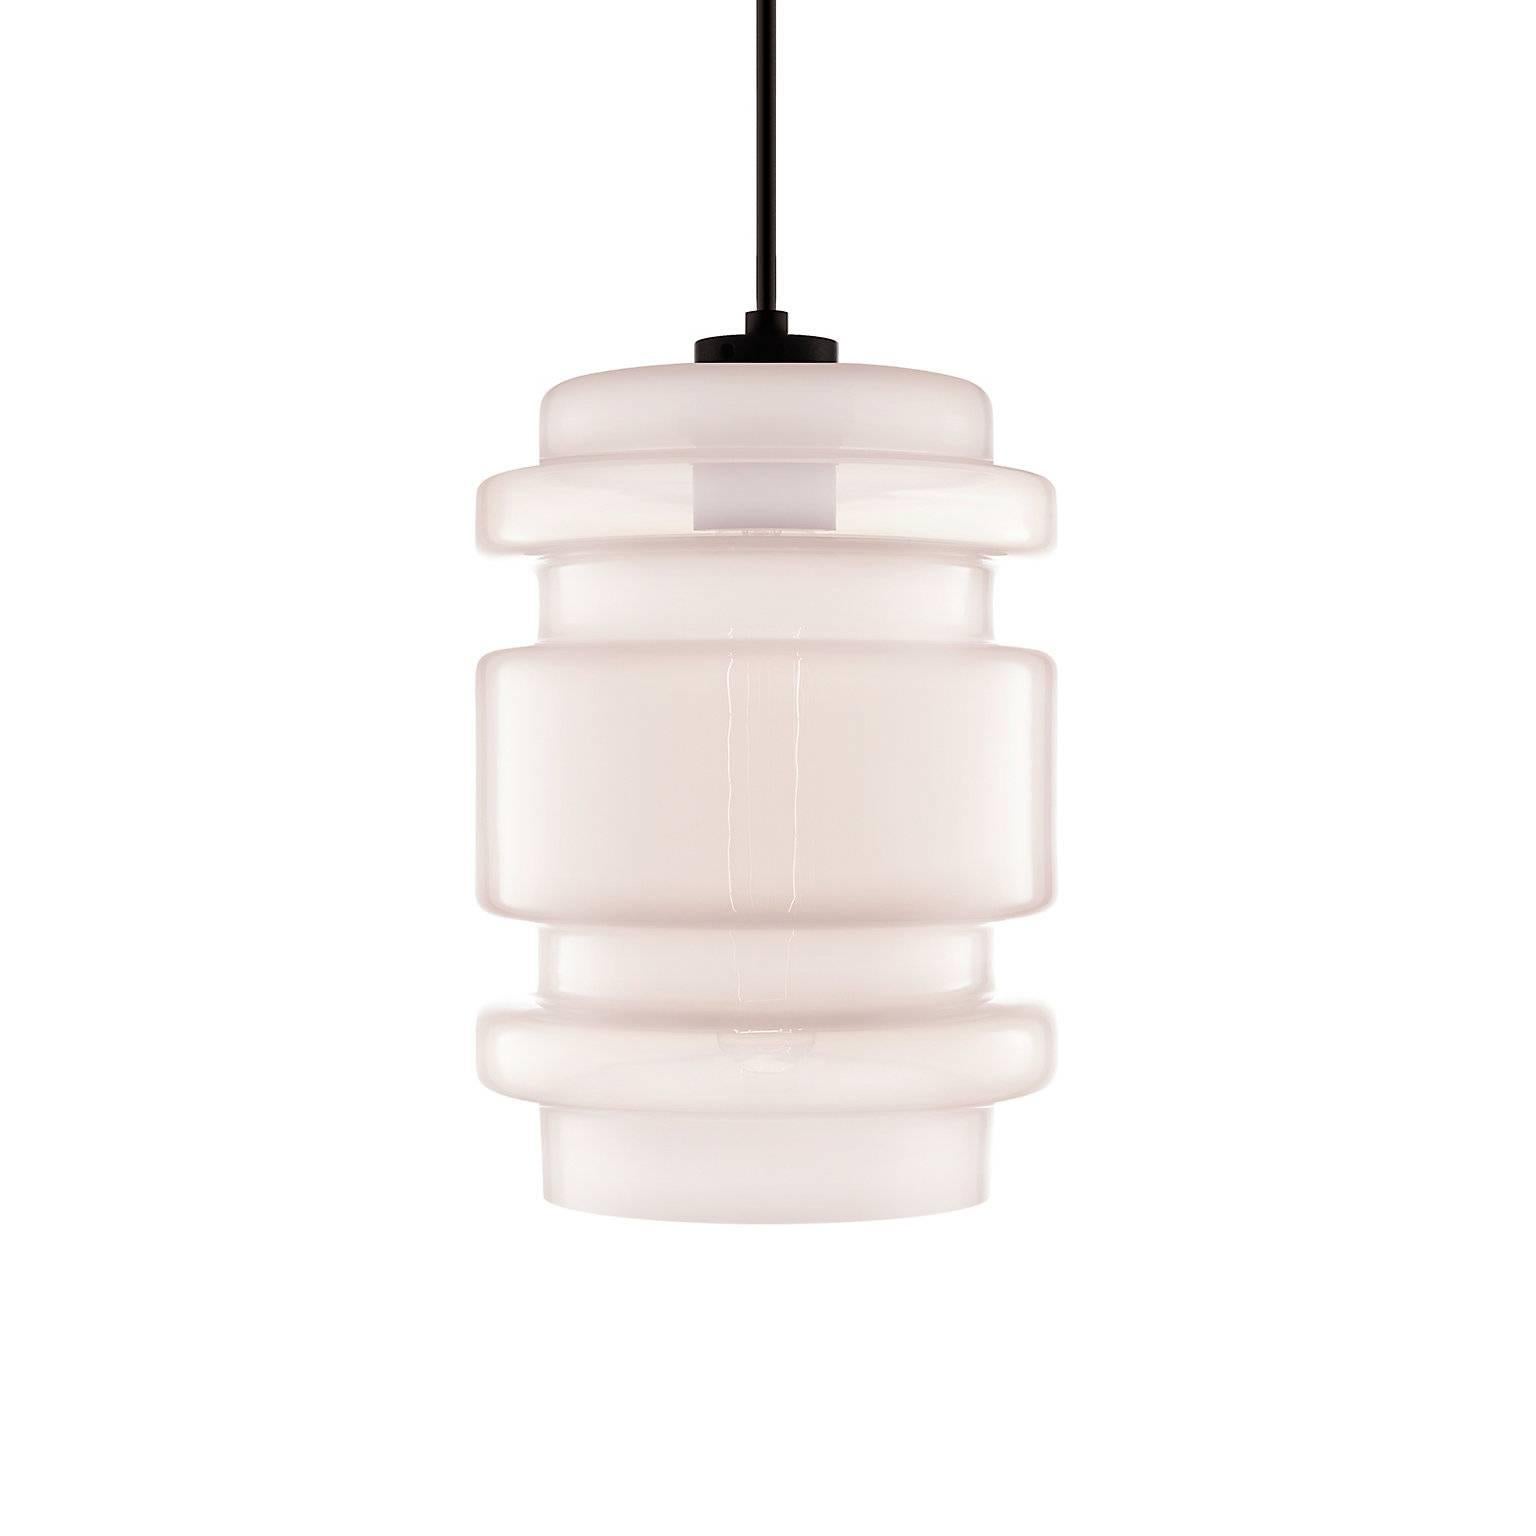 Unique to the Crystalline series, the Delinea pendant light features a dynamic shape and vibrant colors. Pairs easily with the Trove, Axia, and Calla pendants that also comprise the Crystalline series. Every single glass pendant light that comes